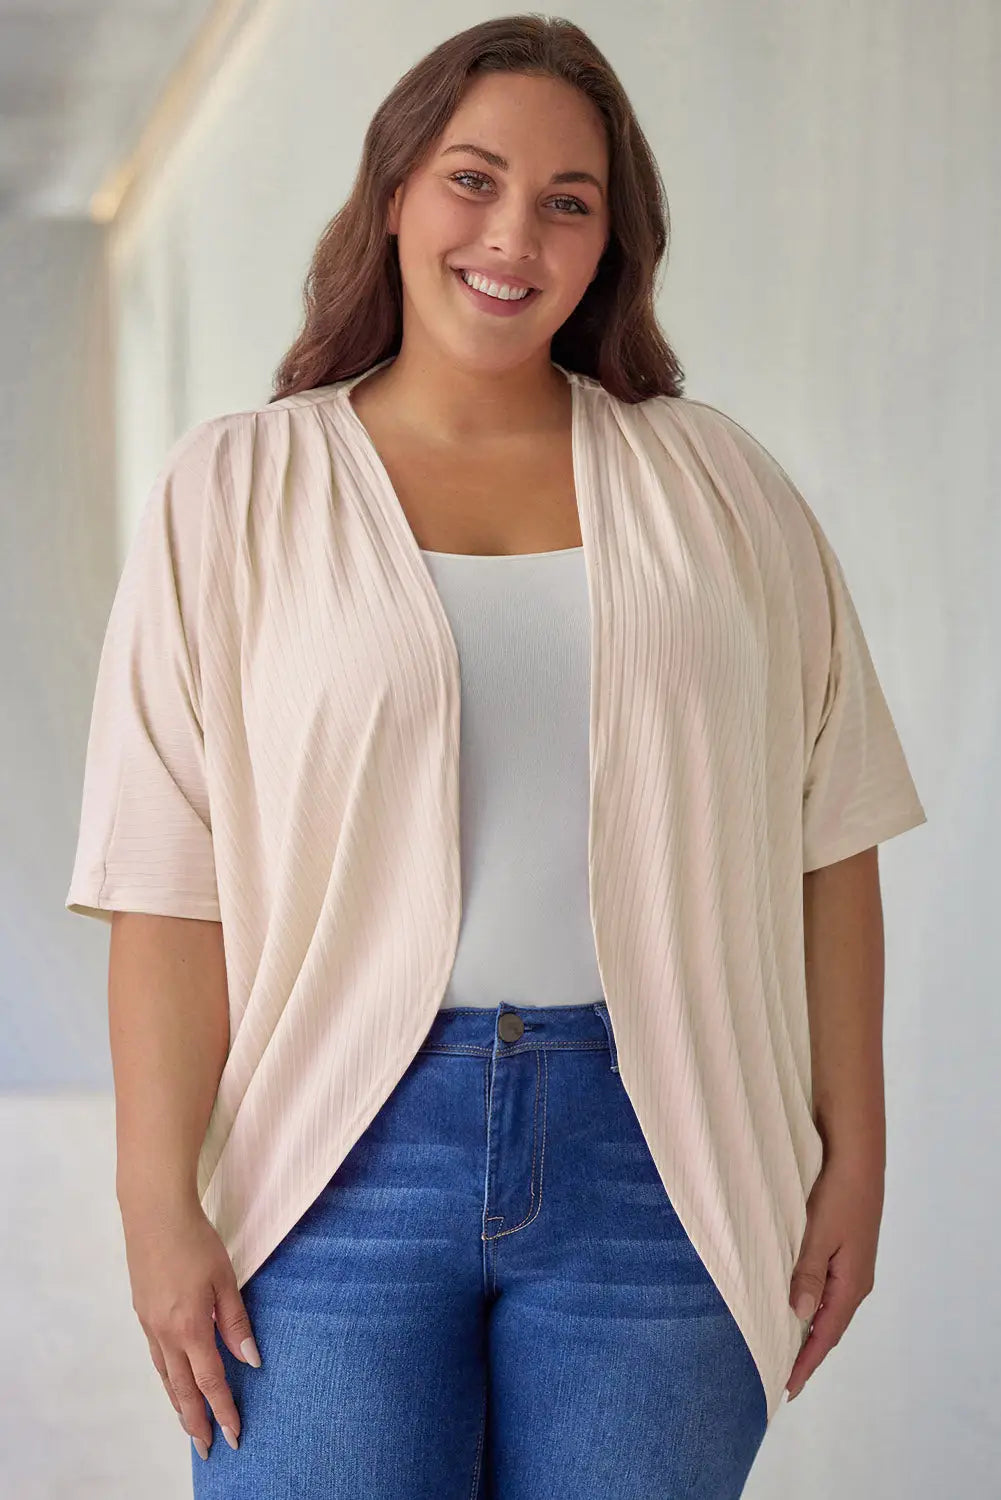 Purple shimmer ribbed texture plus size cardigan - apricot / 1x / 95% polyester + 5% elastane